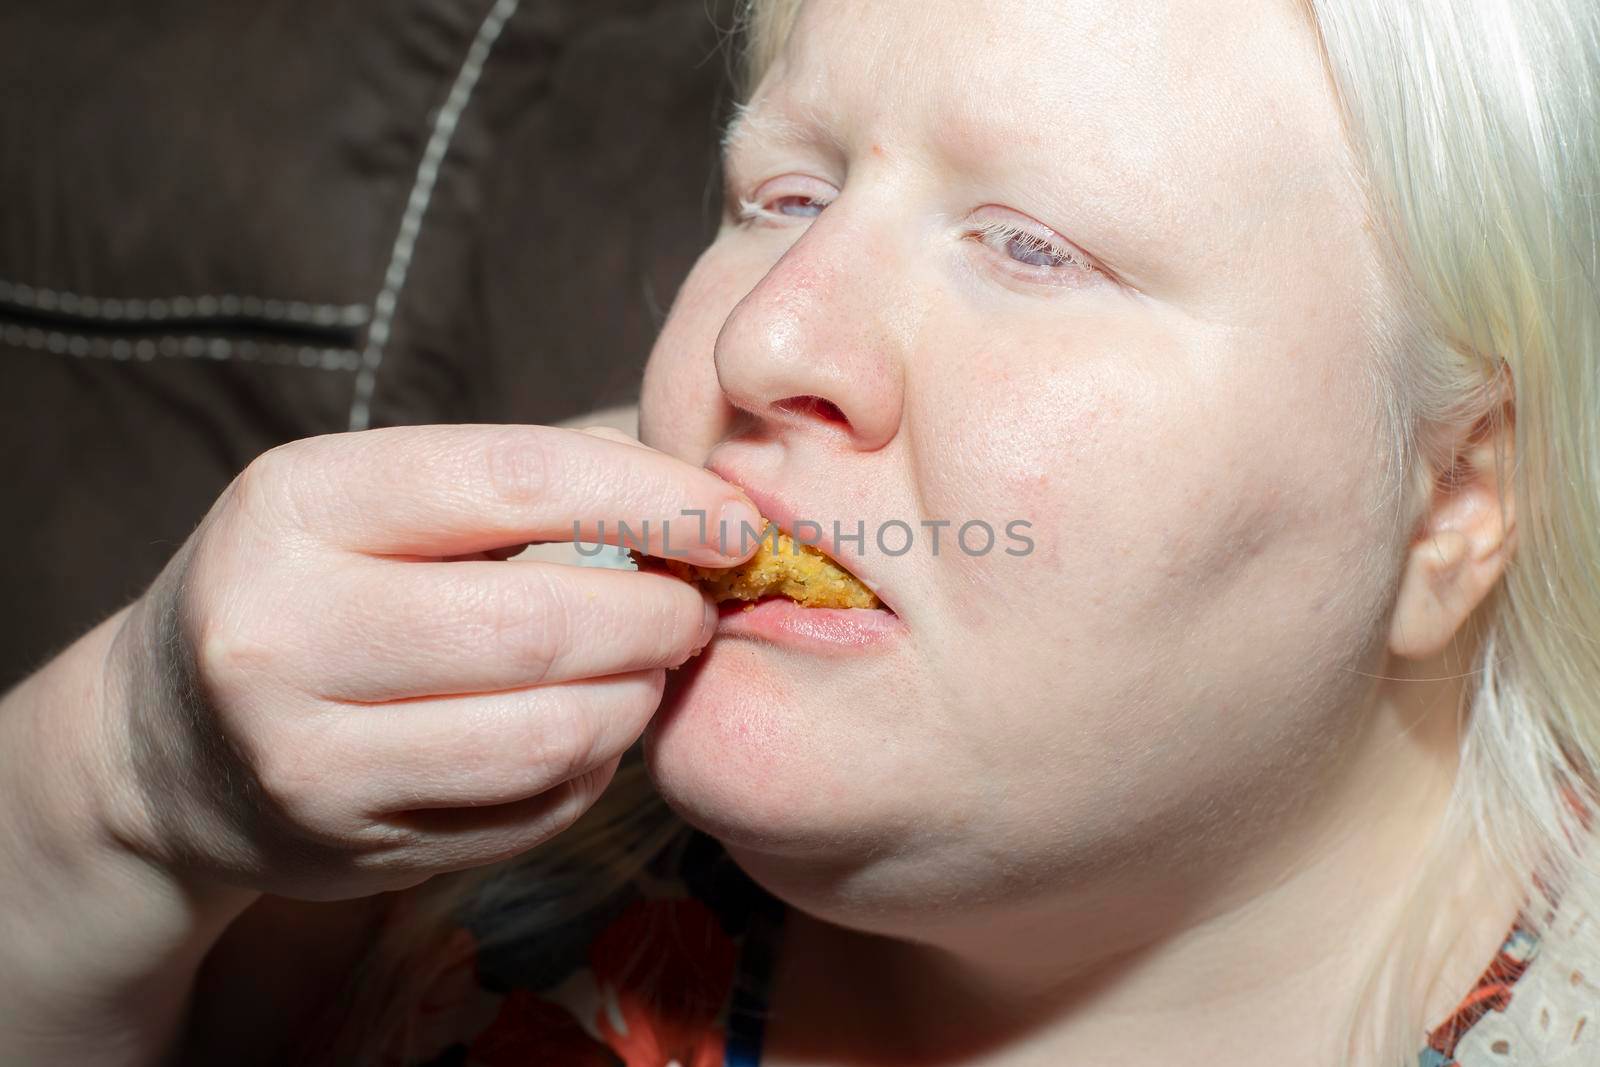 Obese, albino woman enjoying eating fried pickle slices